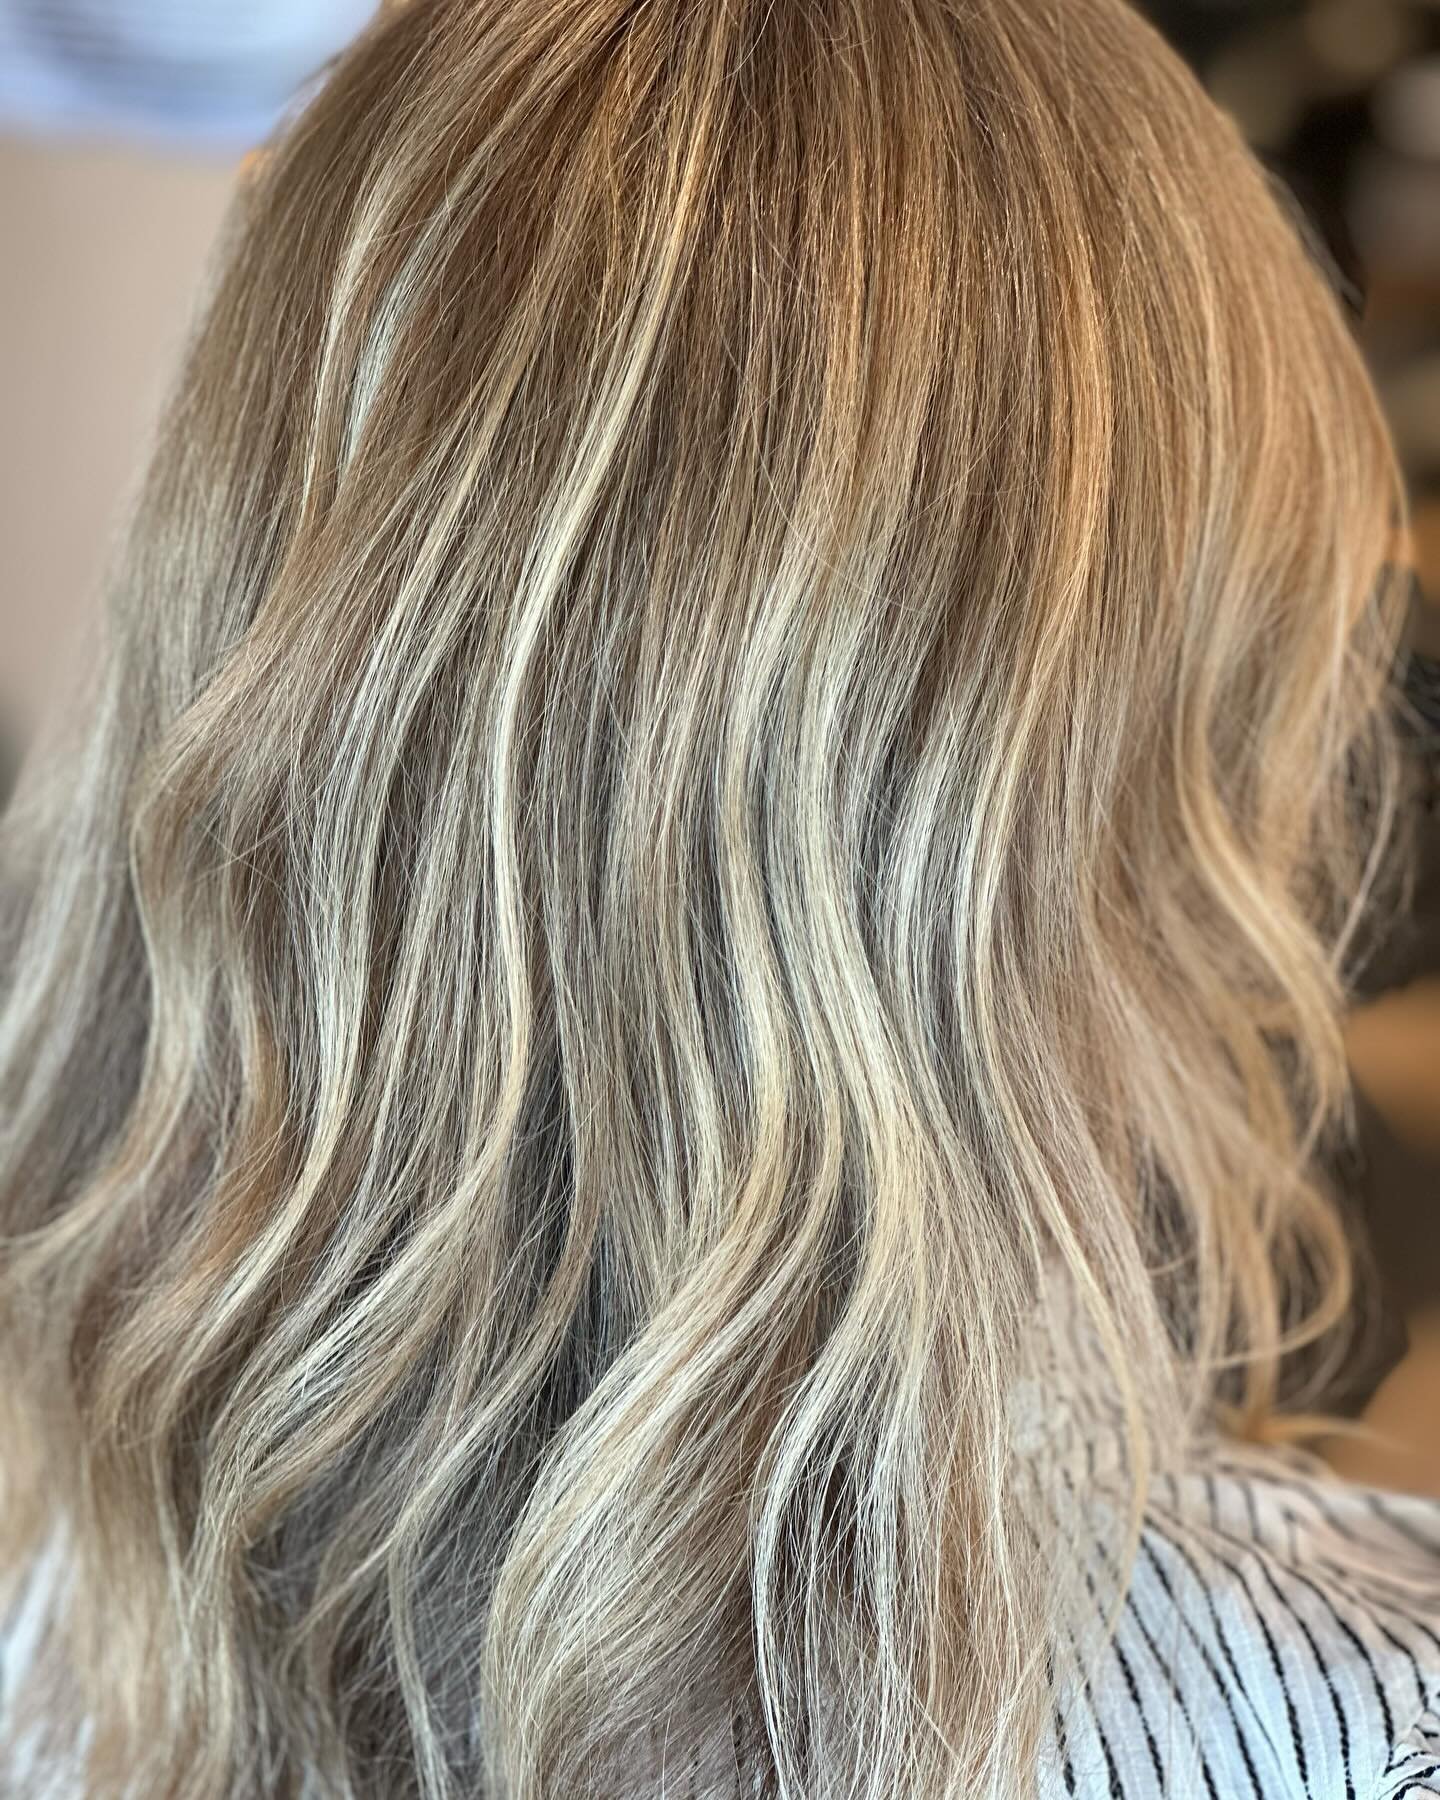 NOTHING TO HIDE 
___________________________________

Double tap for this zoom in on a successful blended &amp; lived in look! 

The process of creating a natural seamless color: 
&bull;Partial foil placement to reconnect some of the grown out lighte